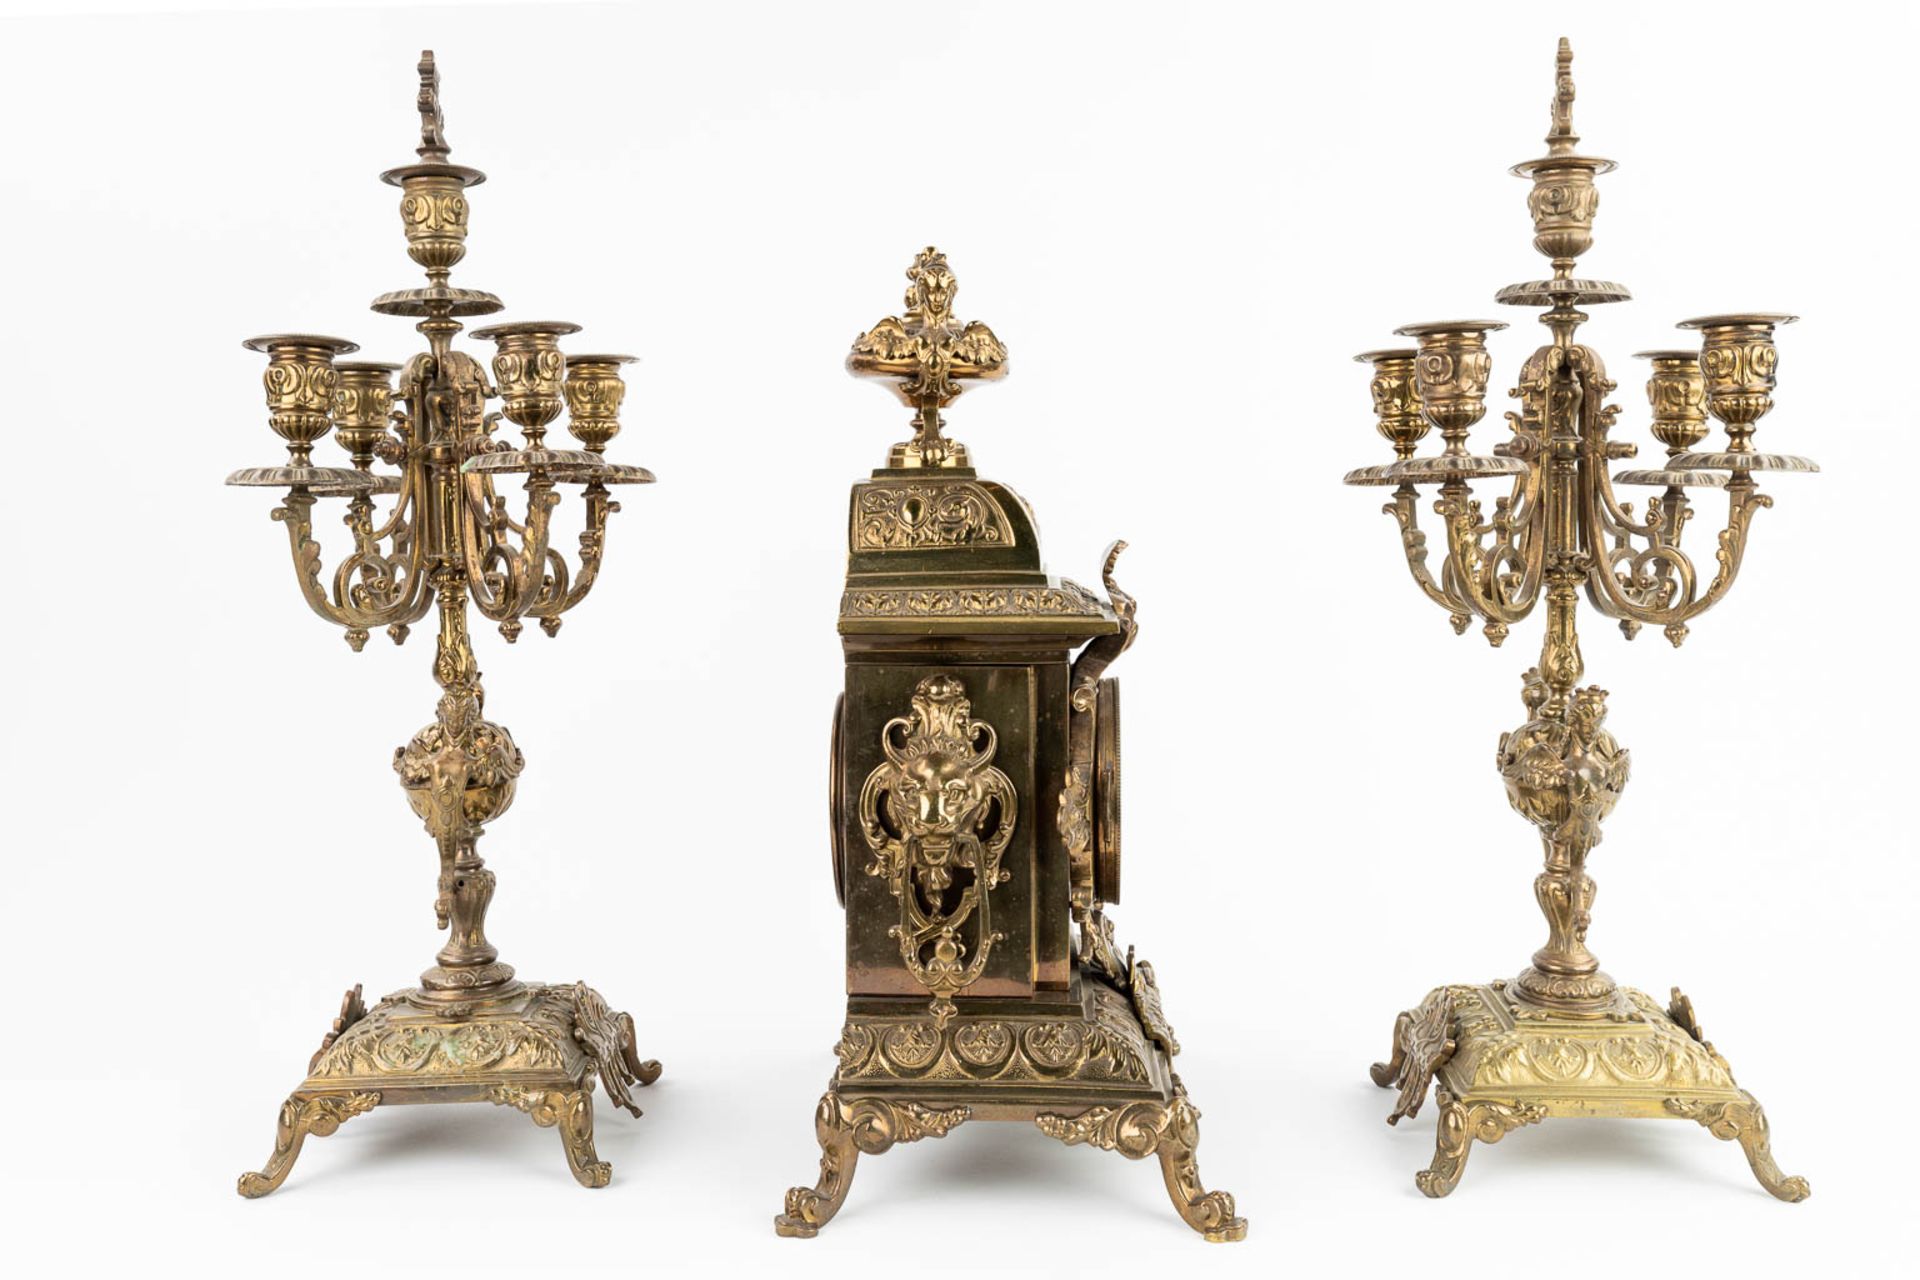 A three-piece mantle garniture clock and candelabra, made of bronze. (20 x 29 x 45cm) - Image 6 of 17